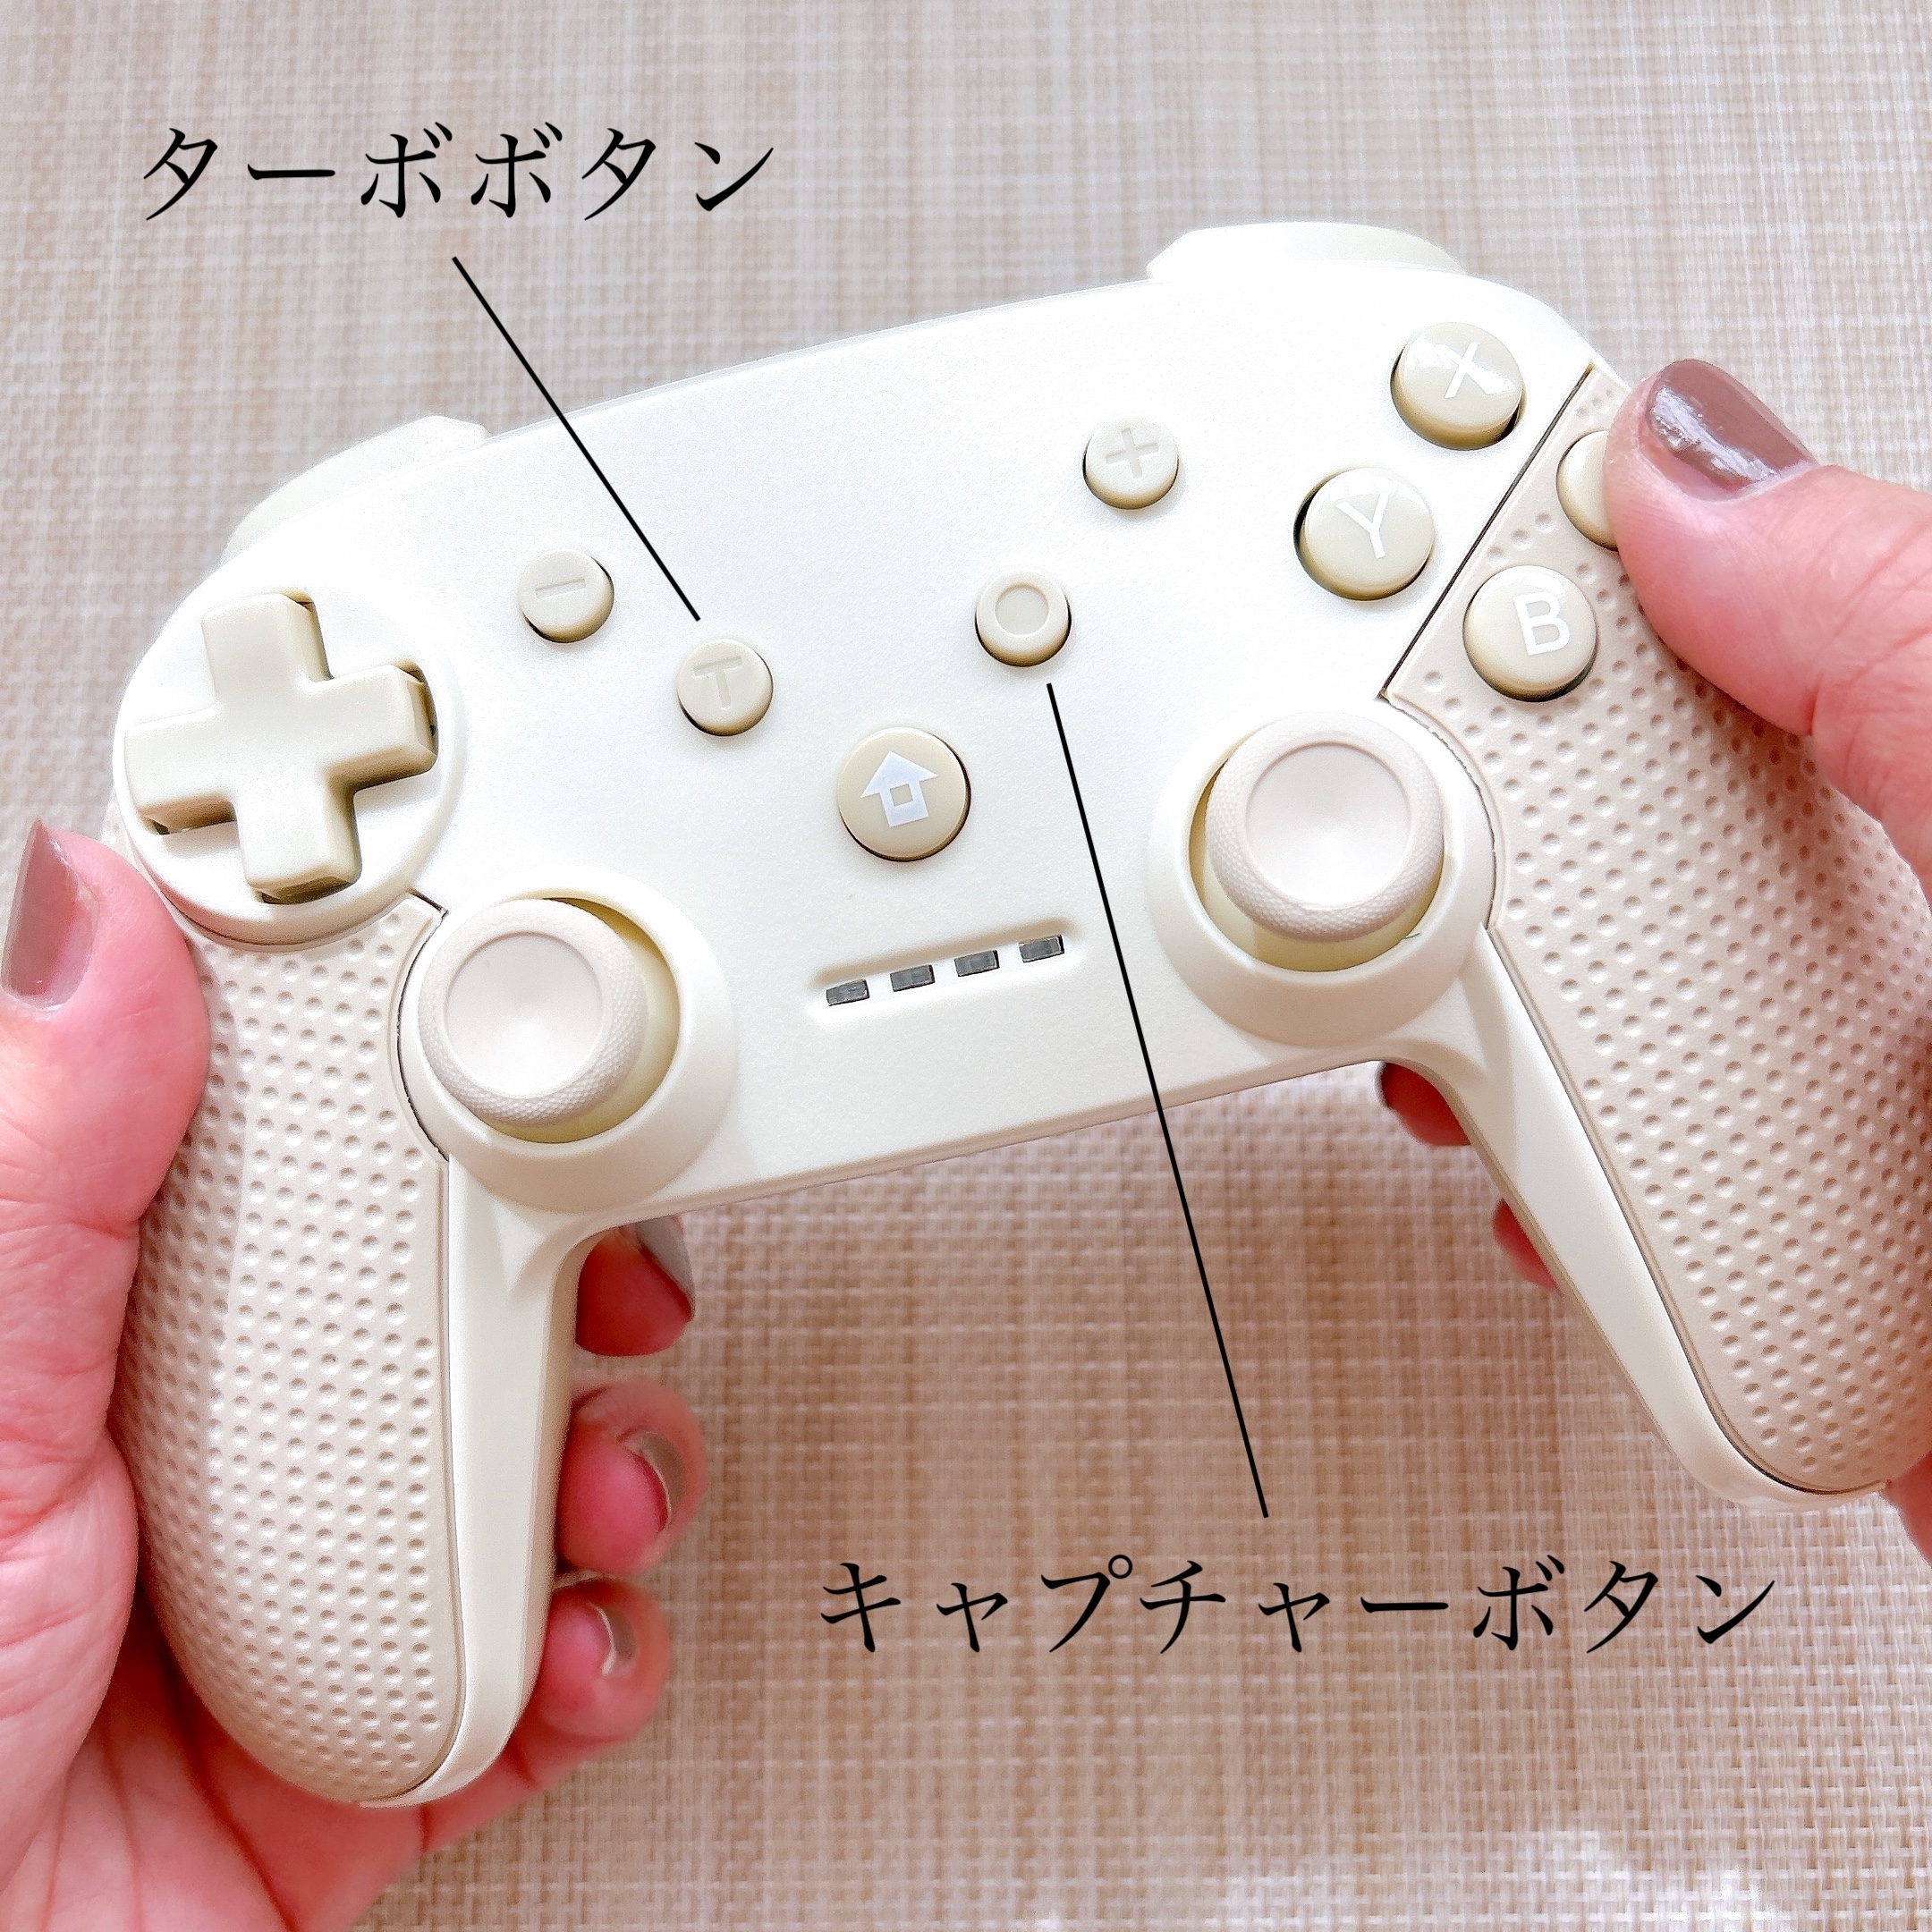 3coins ゲームコントローラー